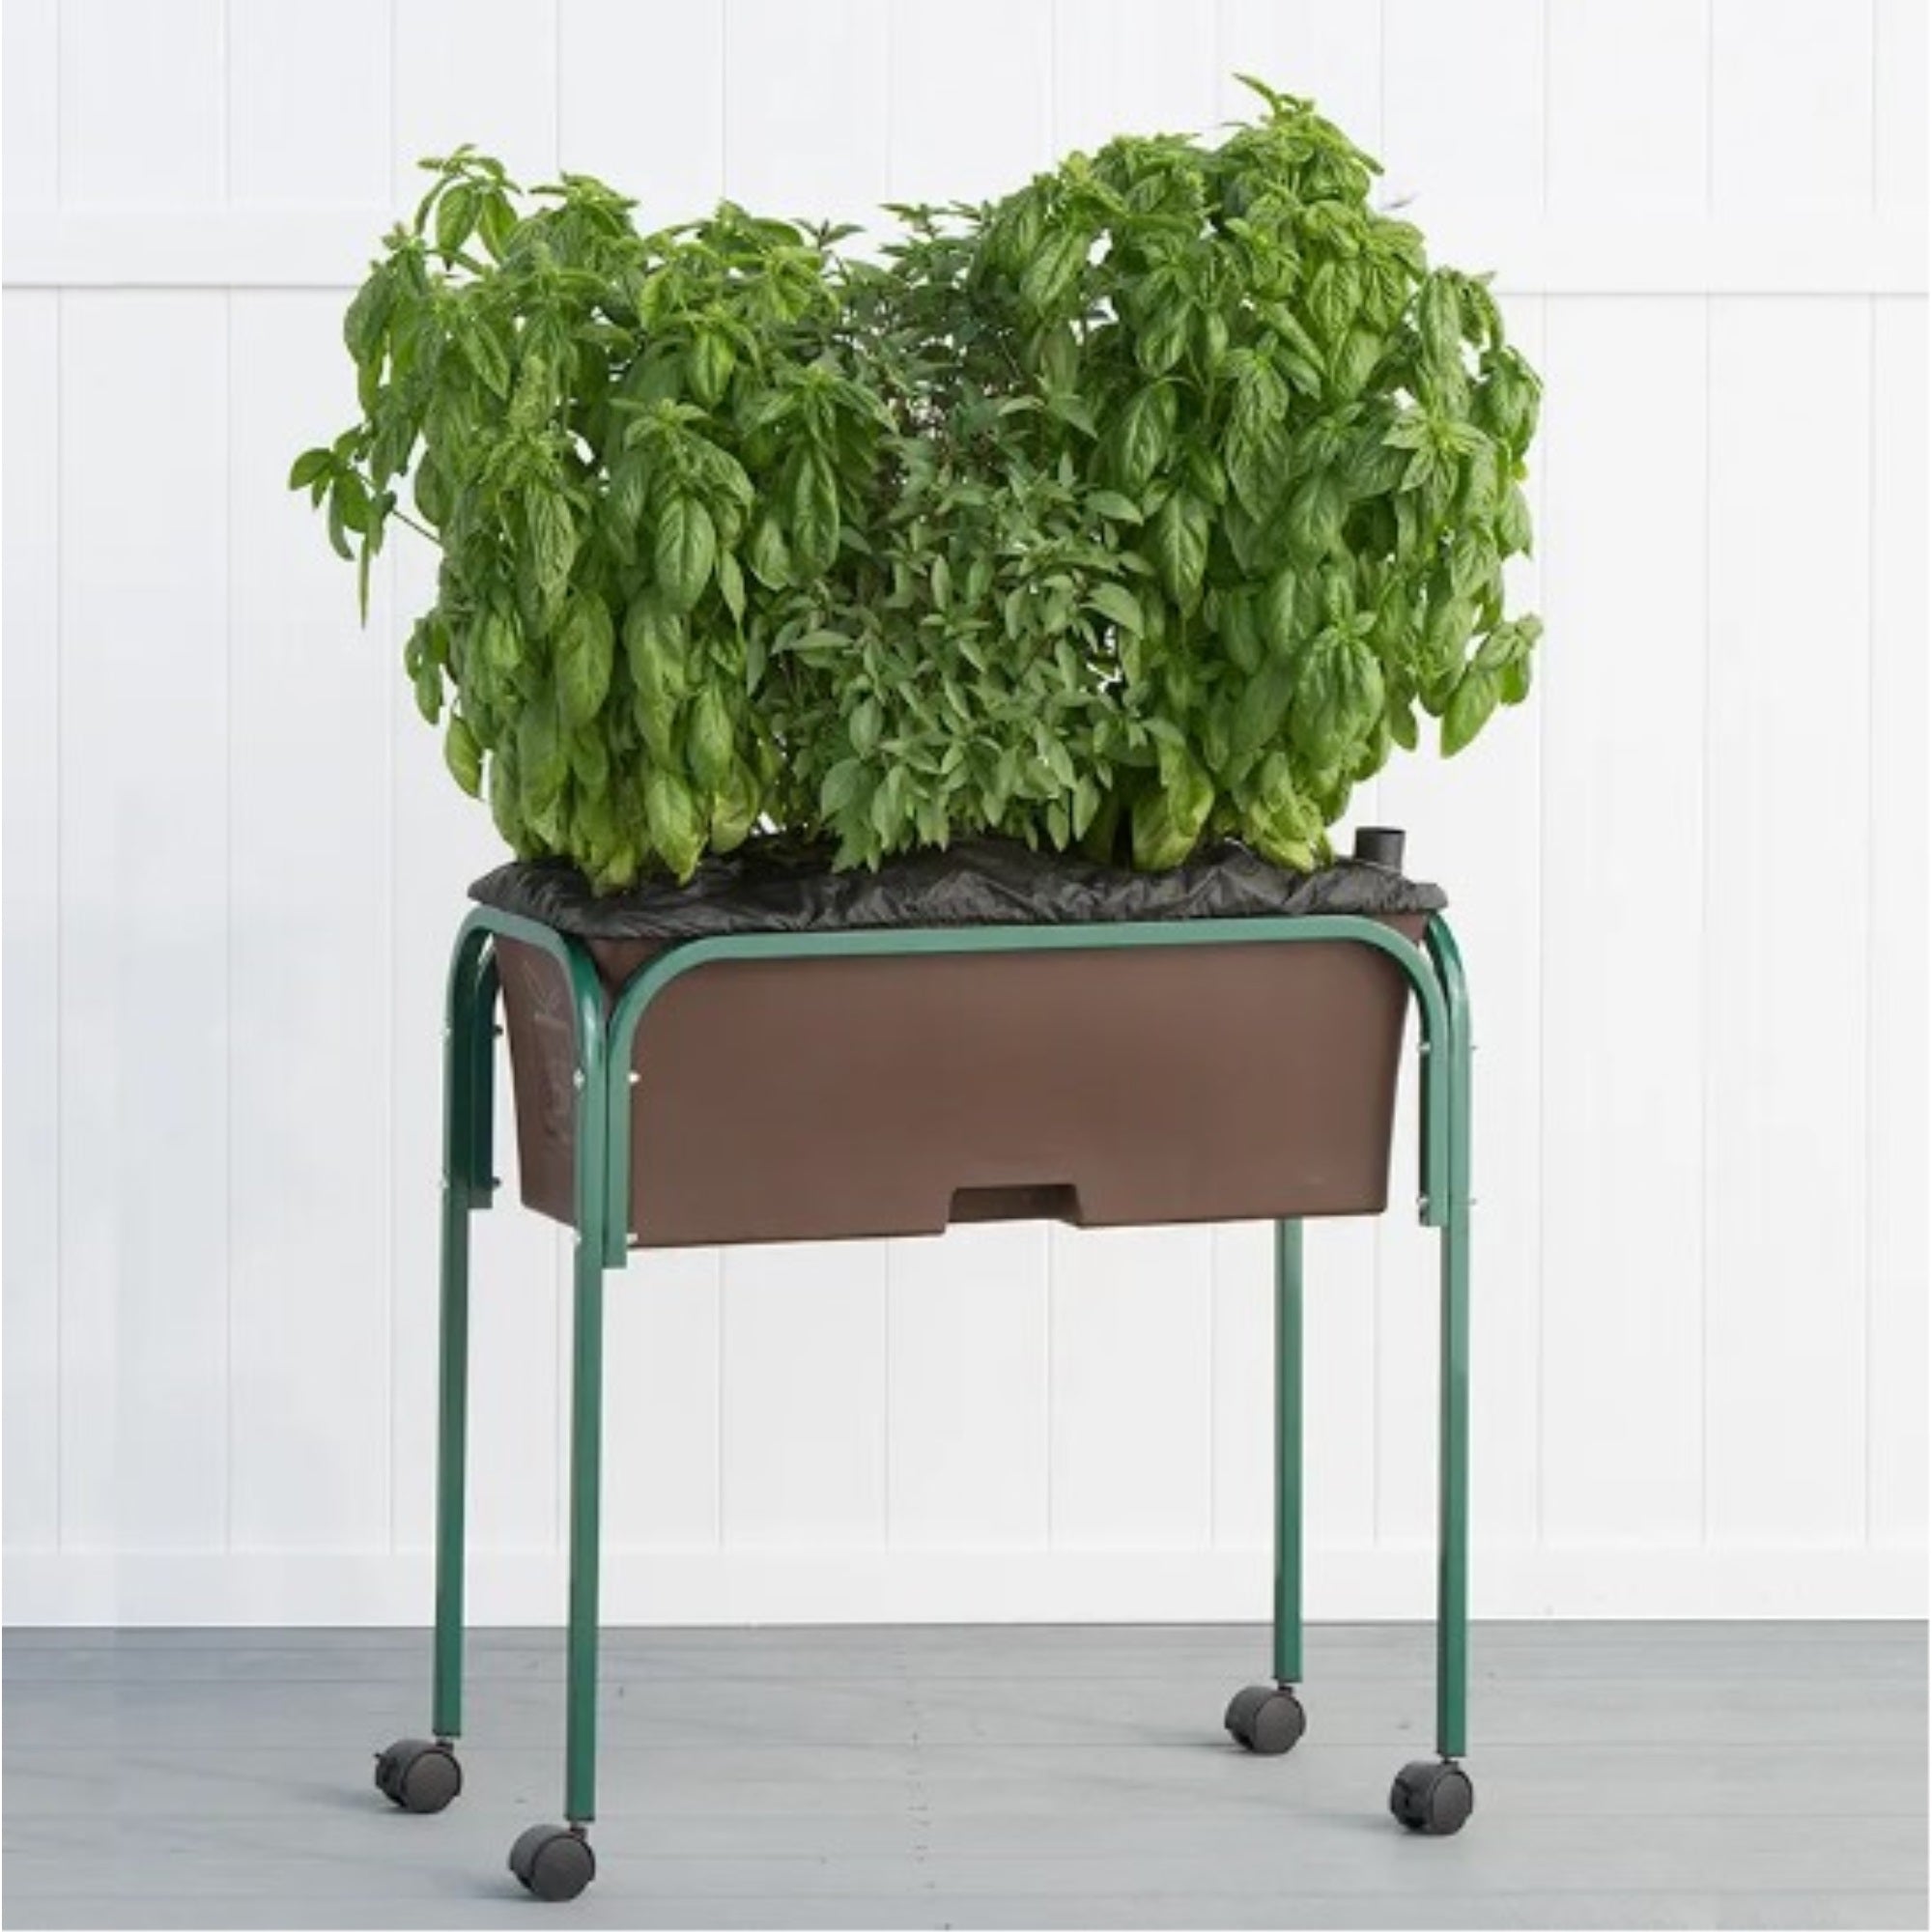 Novelty EarthBox Growing Garden Stand for Original EarthBox System